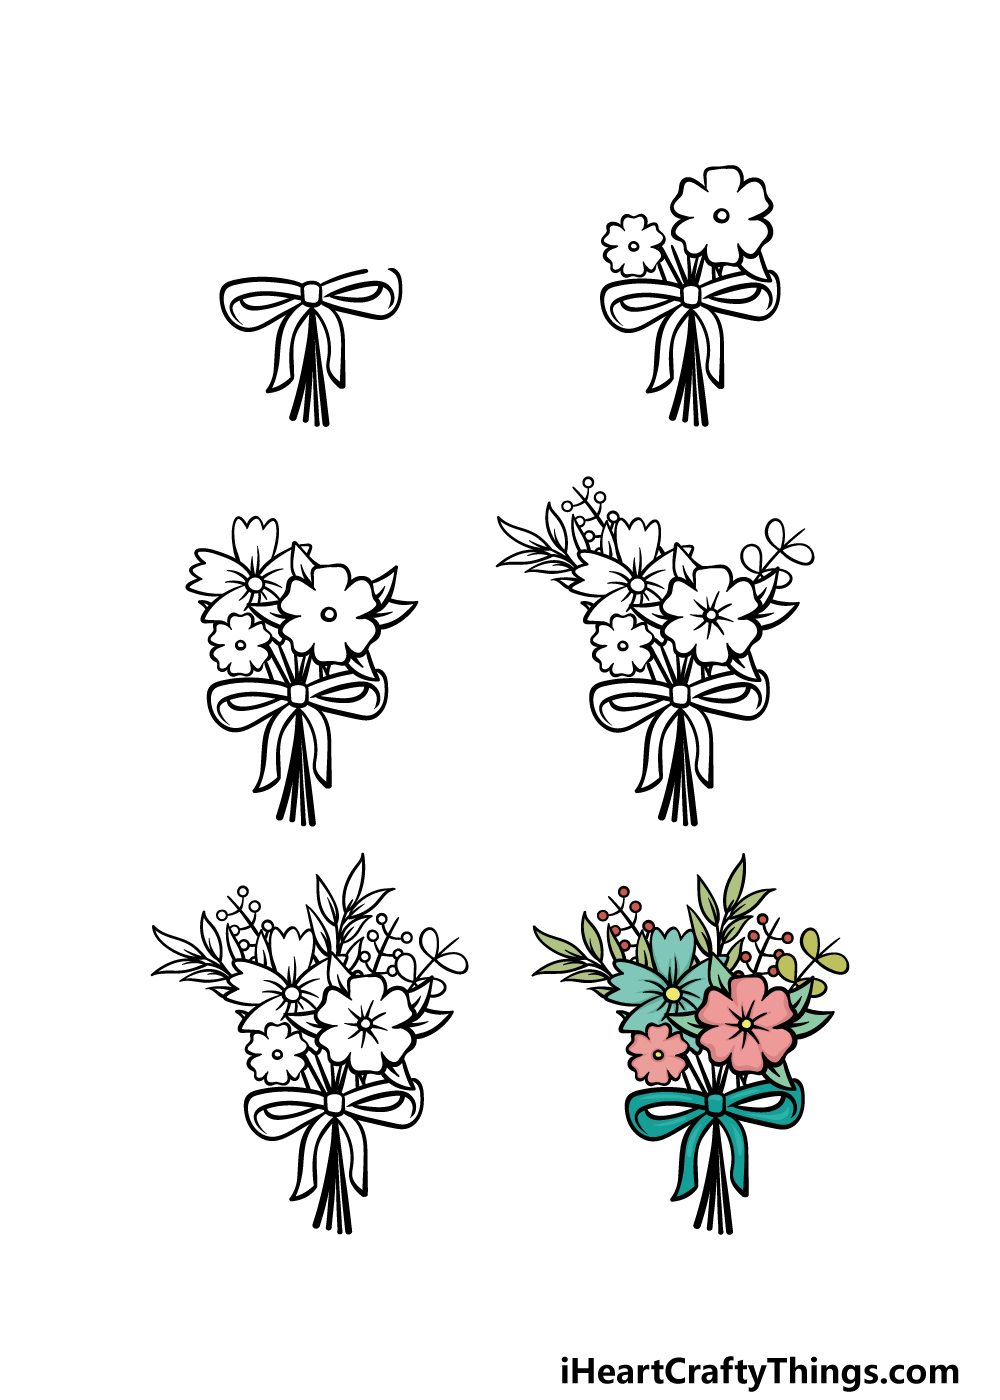 how to draw cartoon flowers in 6 steps